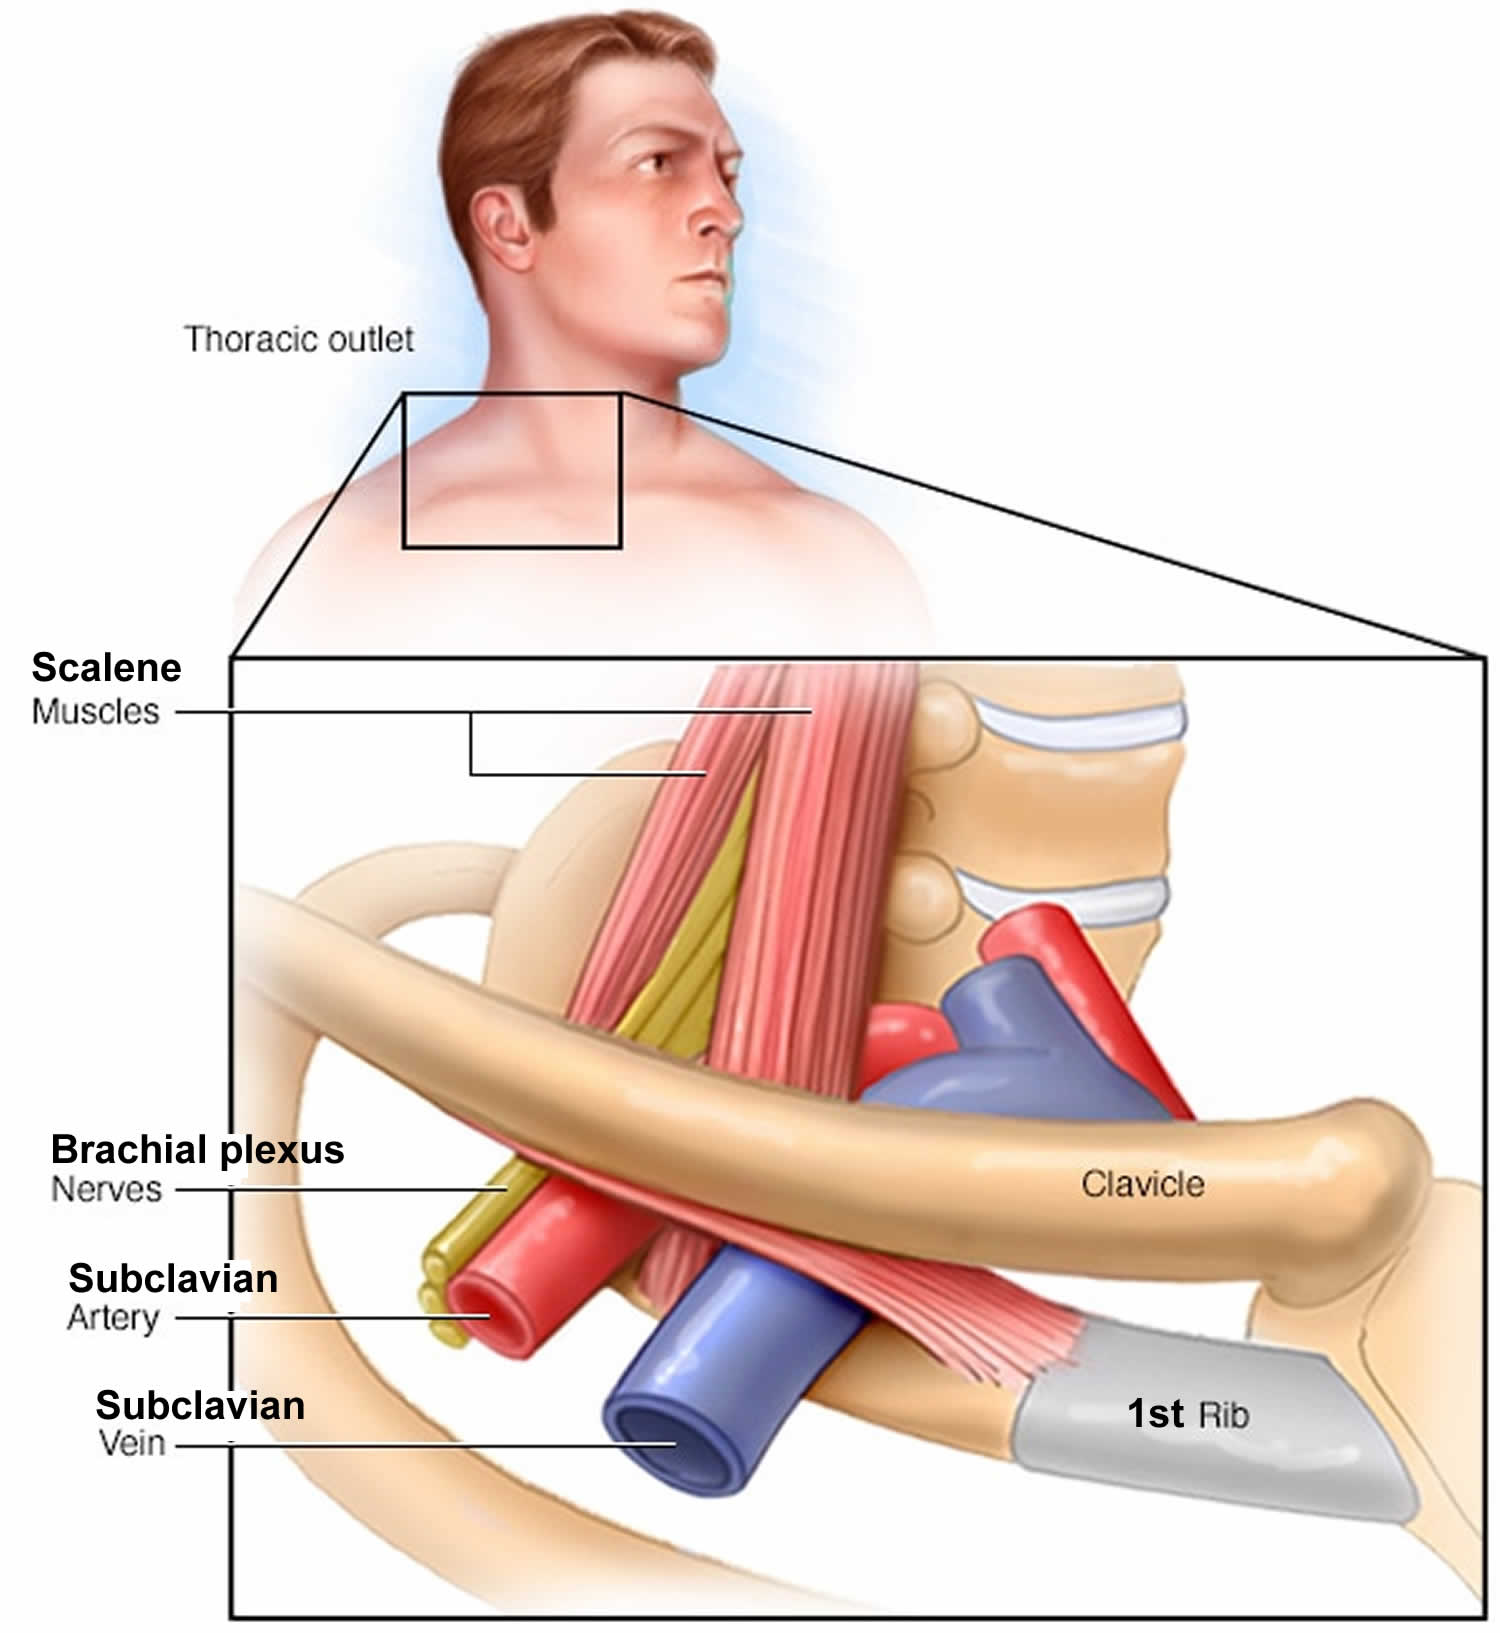 thoracic outlet syndrome treatment